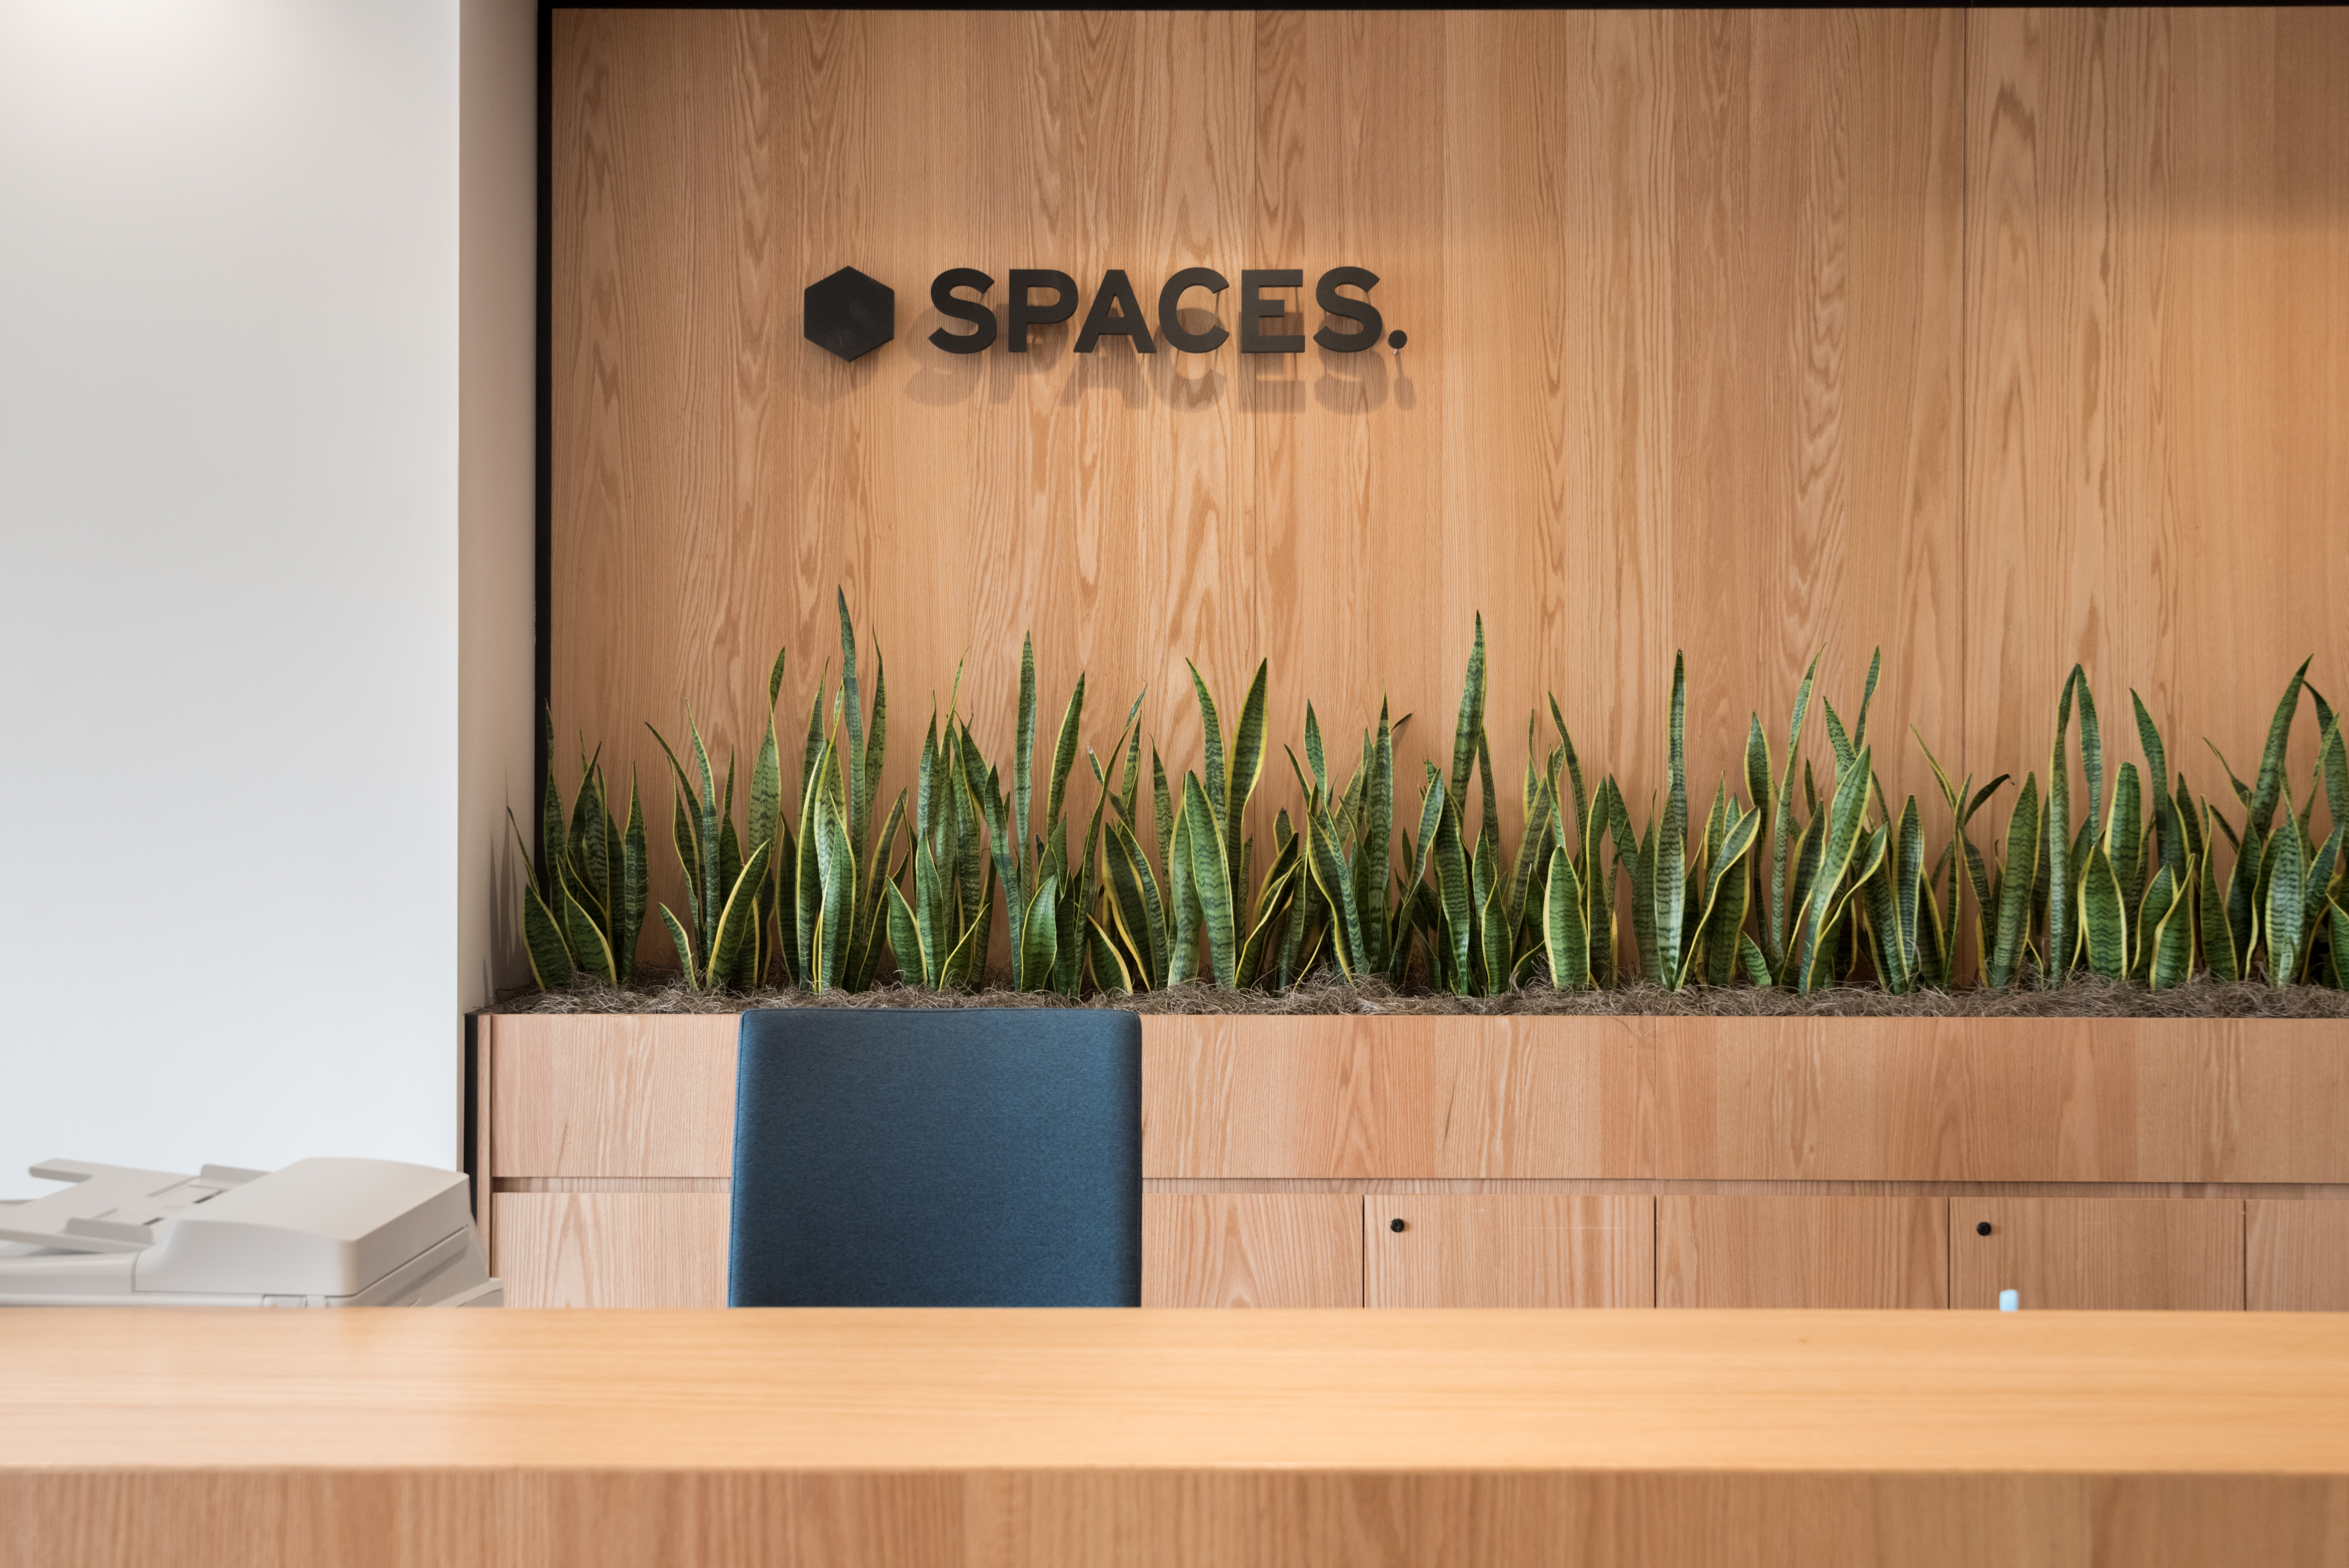 Spaces - California, Los Angeles - Spaces Hollywood Photo